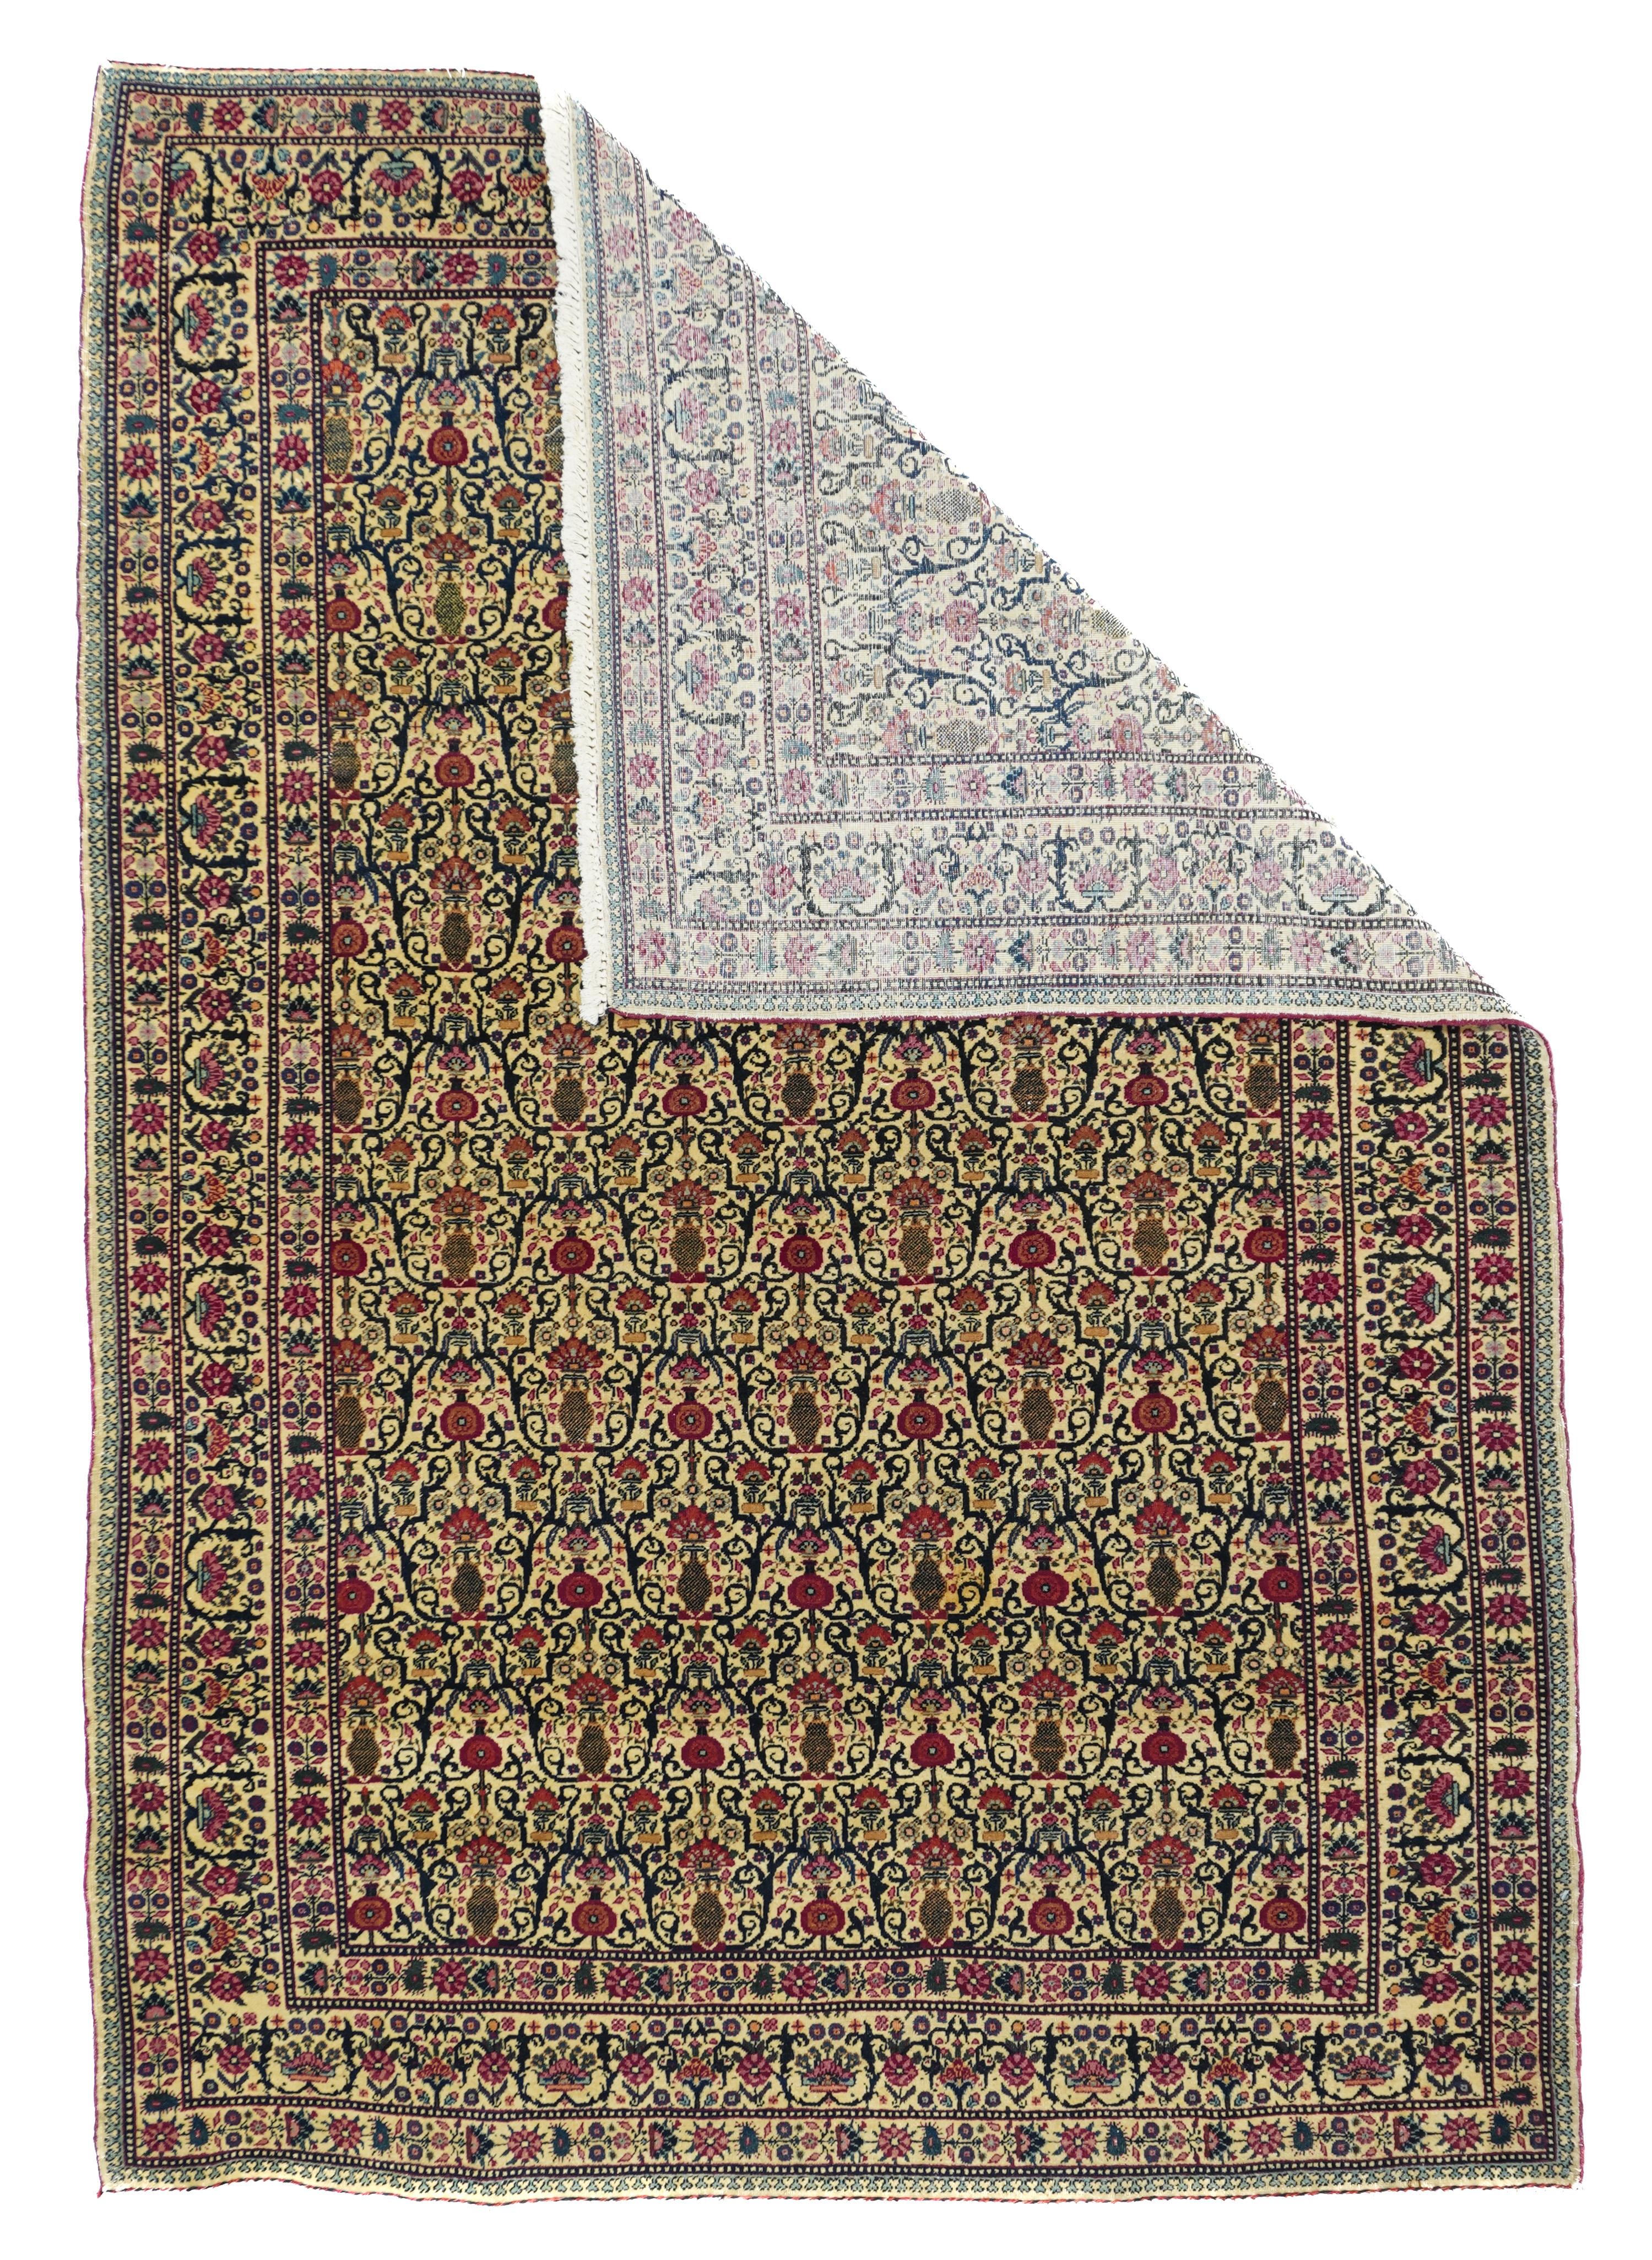 Antique Tabriz rug 4'5'' x 6'7''. All eggshell, field and borders, with small, dense, allover textile patterns of, in the field, a skeletal escutcheon and cartouche lattice enclosing tiny red vases and peacock tail palmettes, and in the border